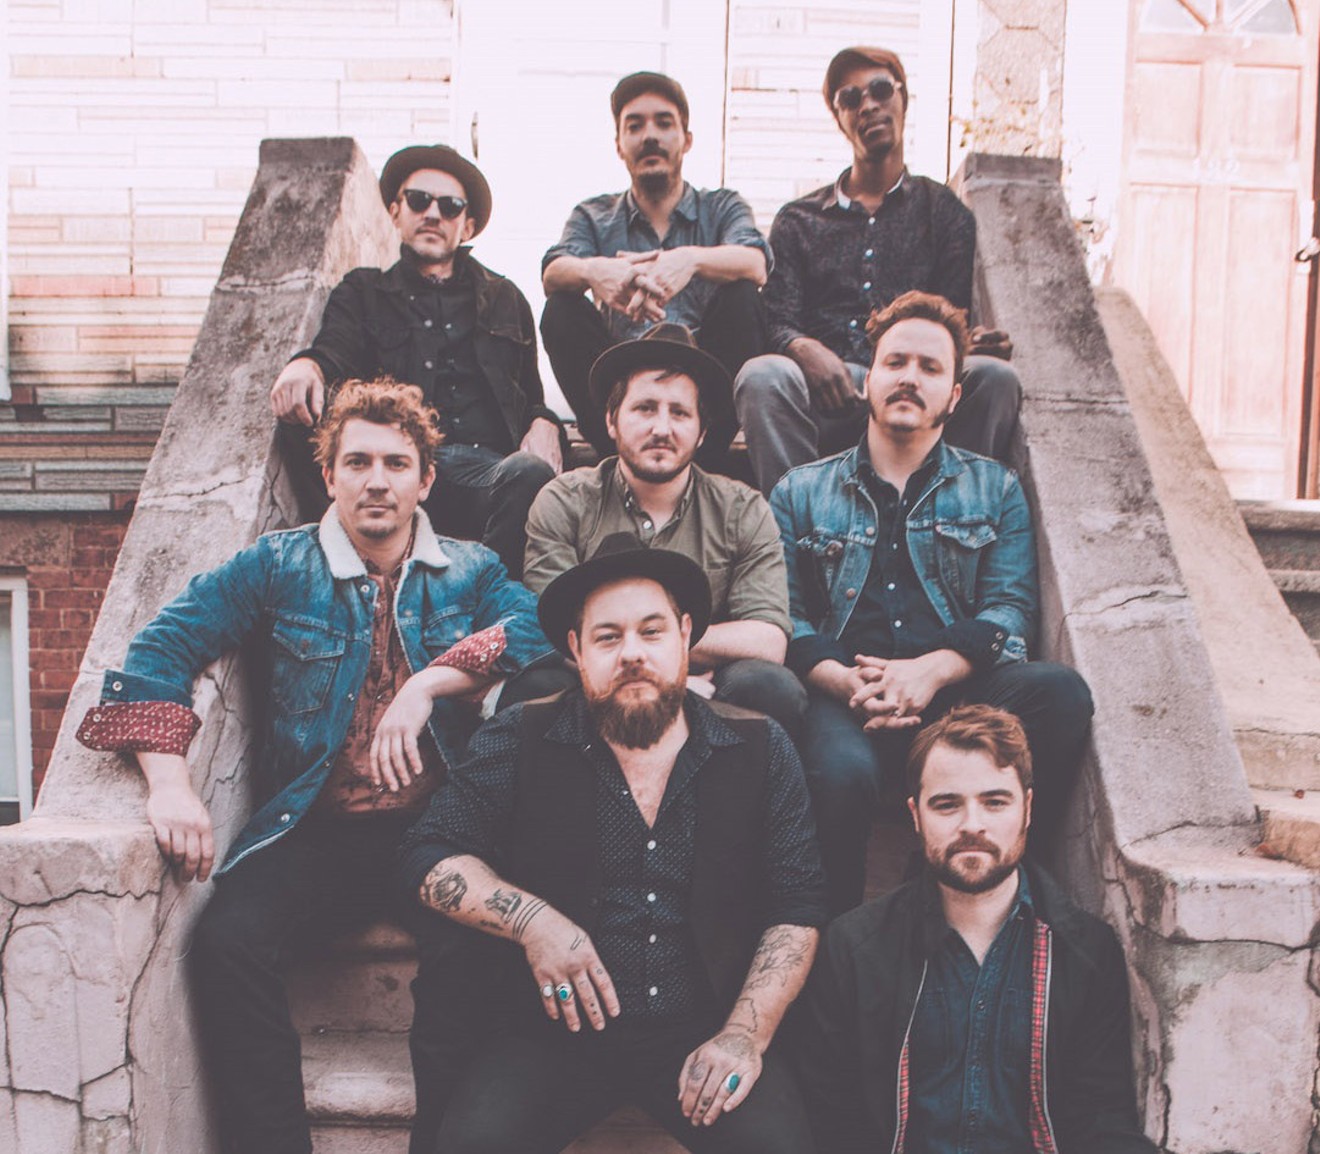 Nathaniel Rateliff & the Night Sweats will headline a benefit concert at 1STBANK Center for Take Note Colorado.